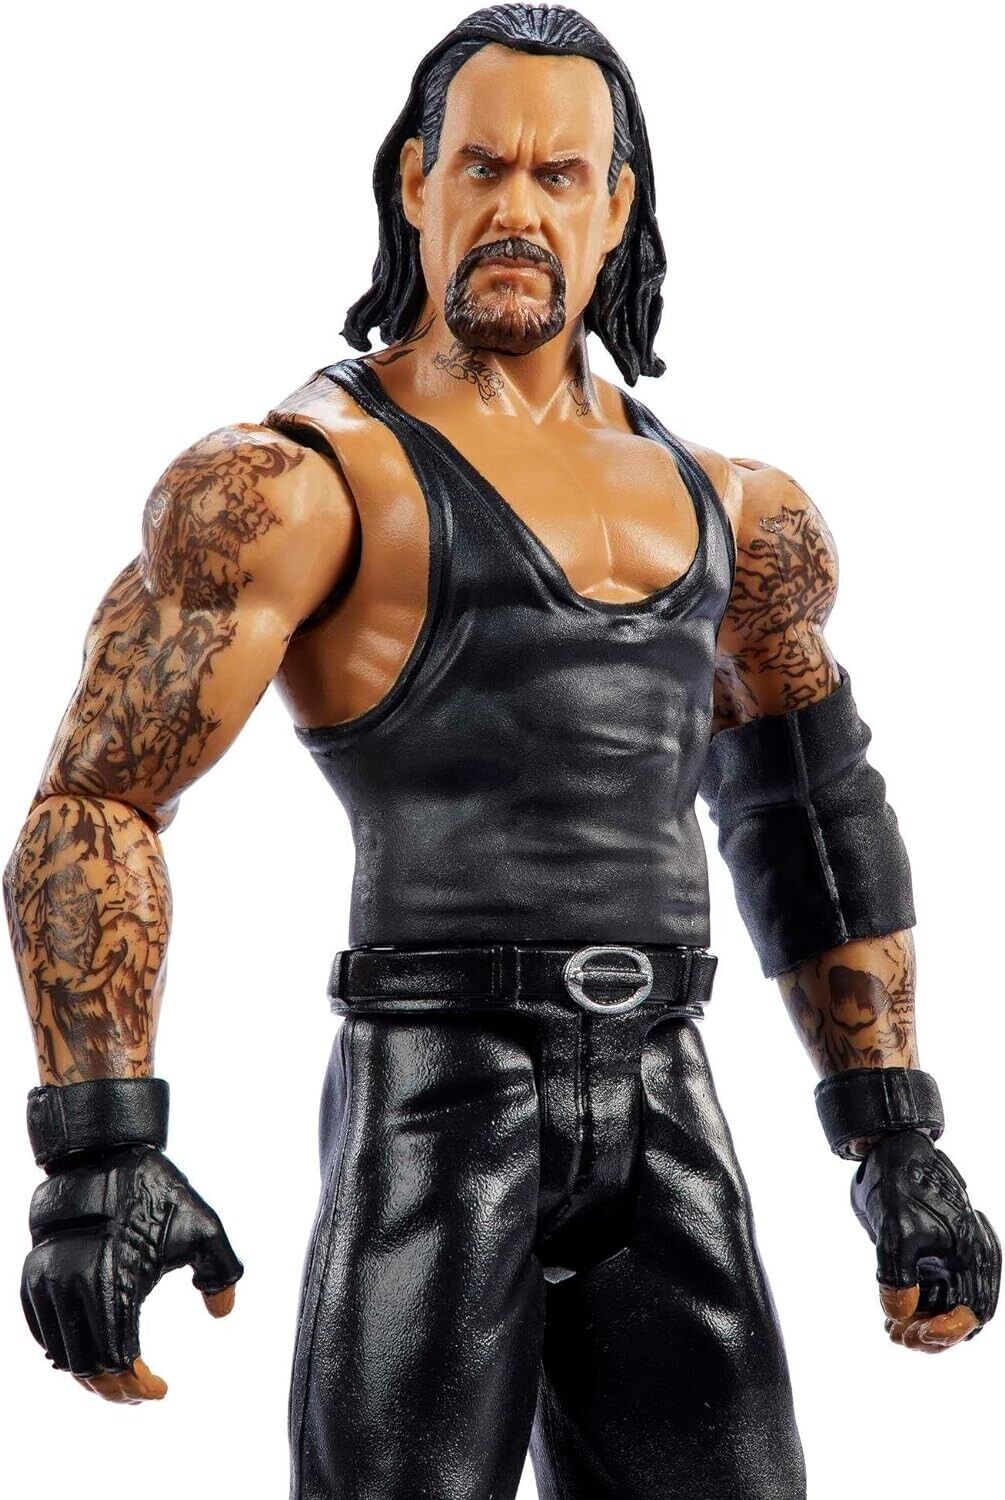 WWE Action Figure Undertaker WrestleMania Basics, Posable 6-inch Collectible for